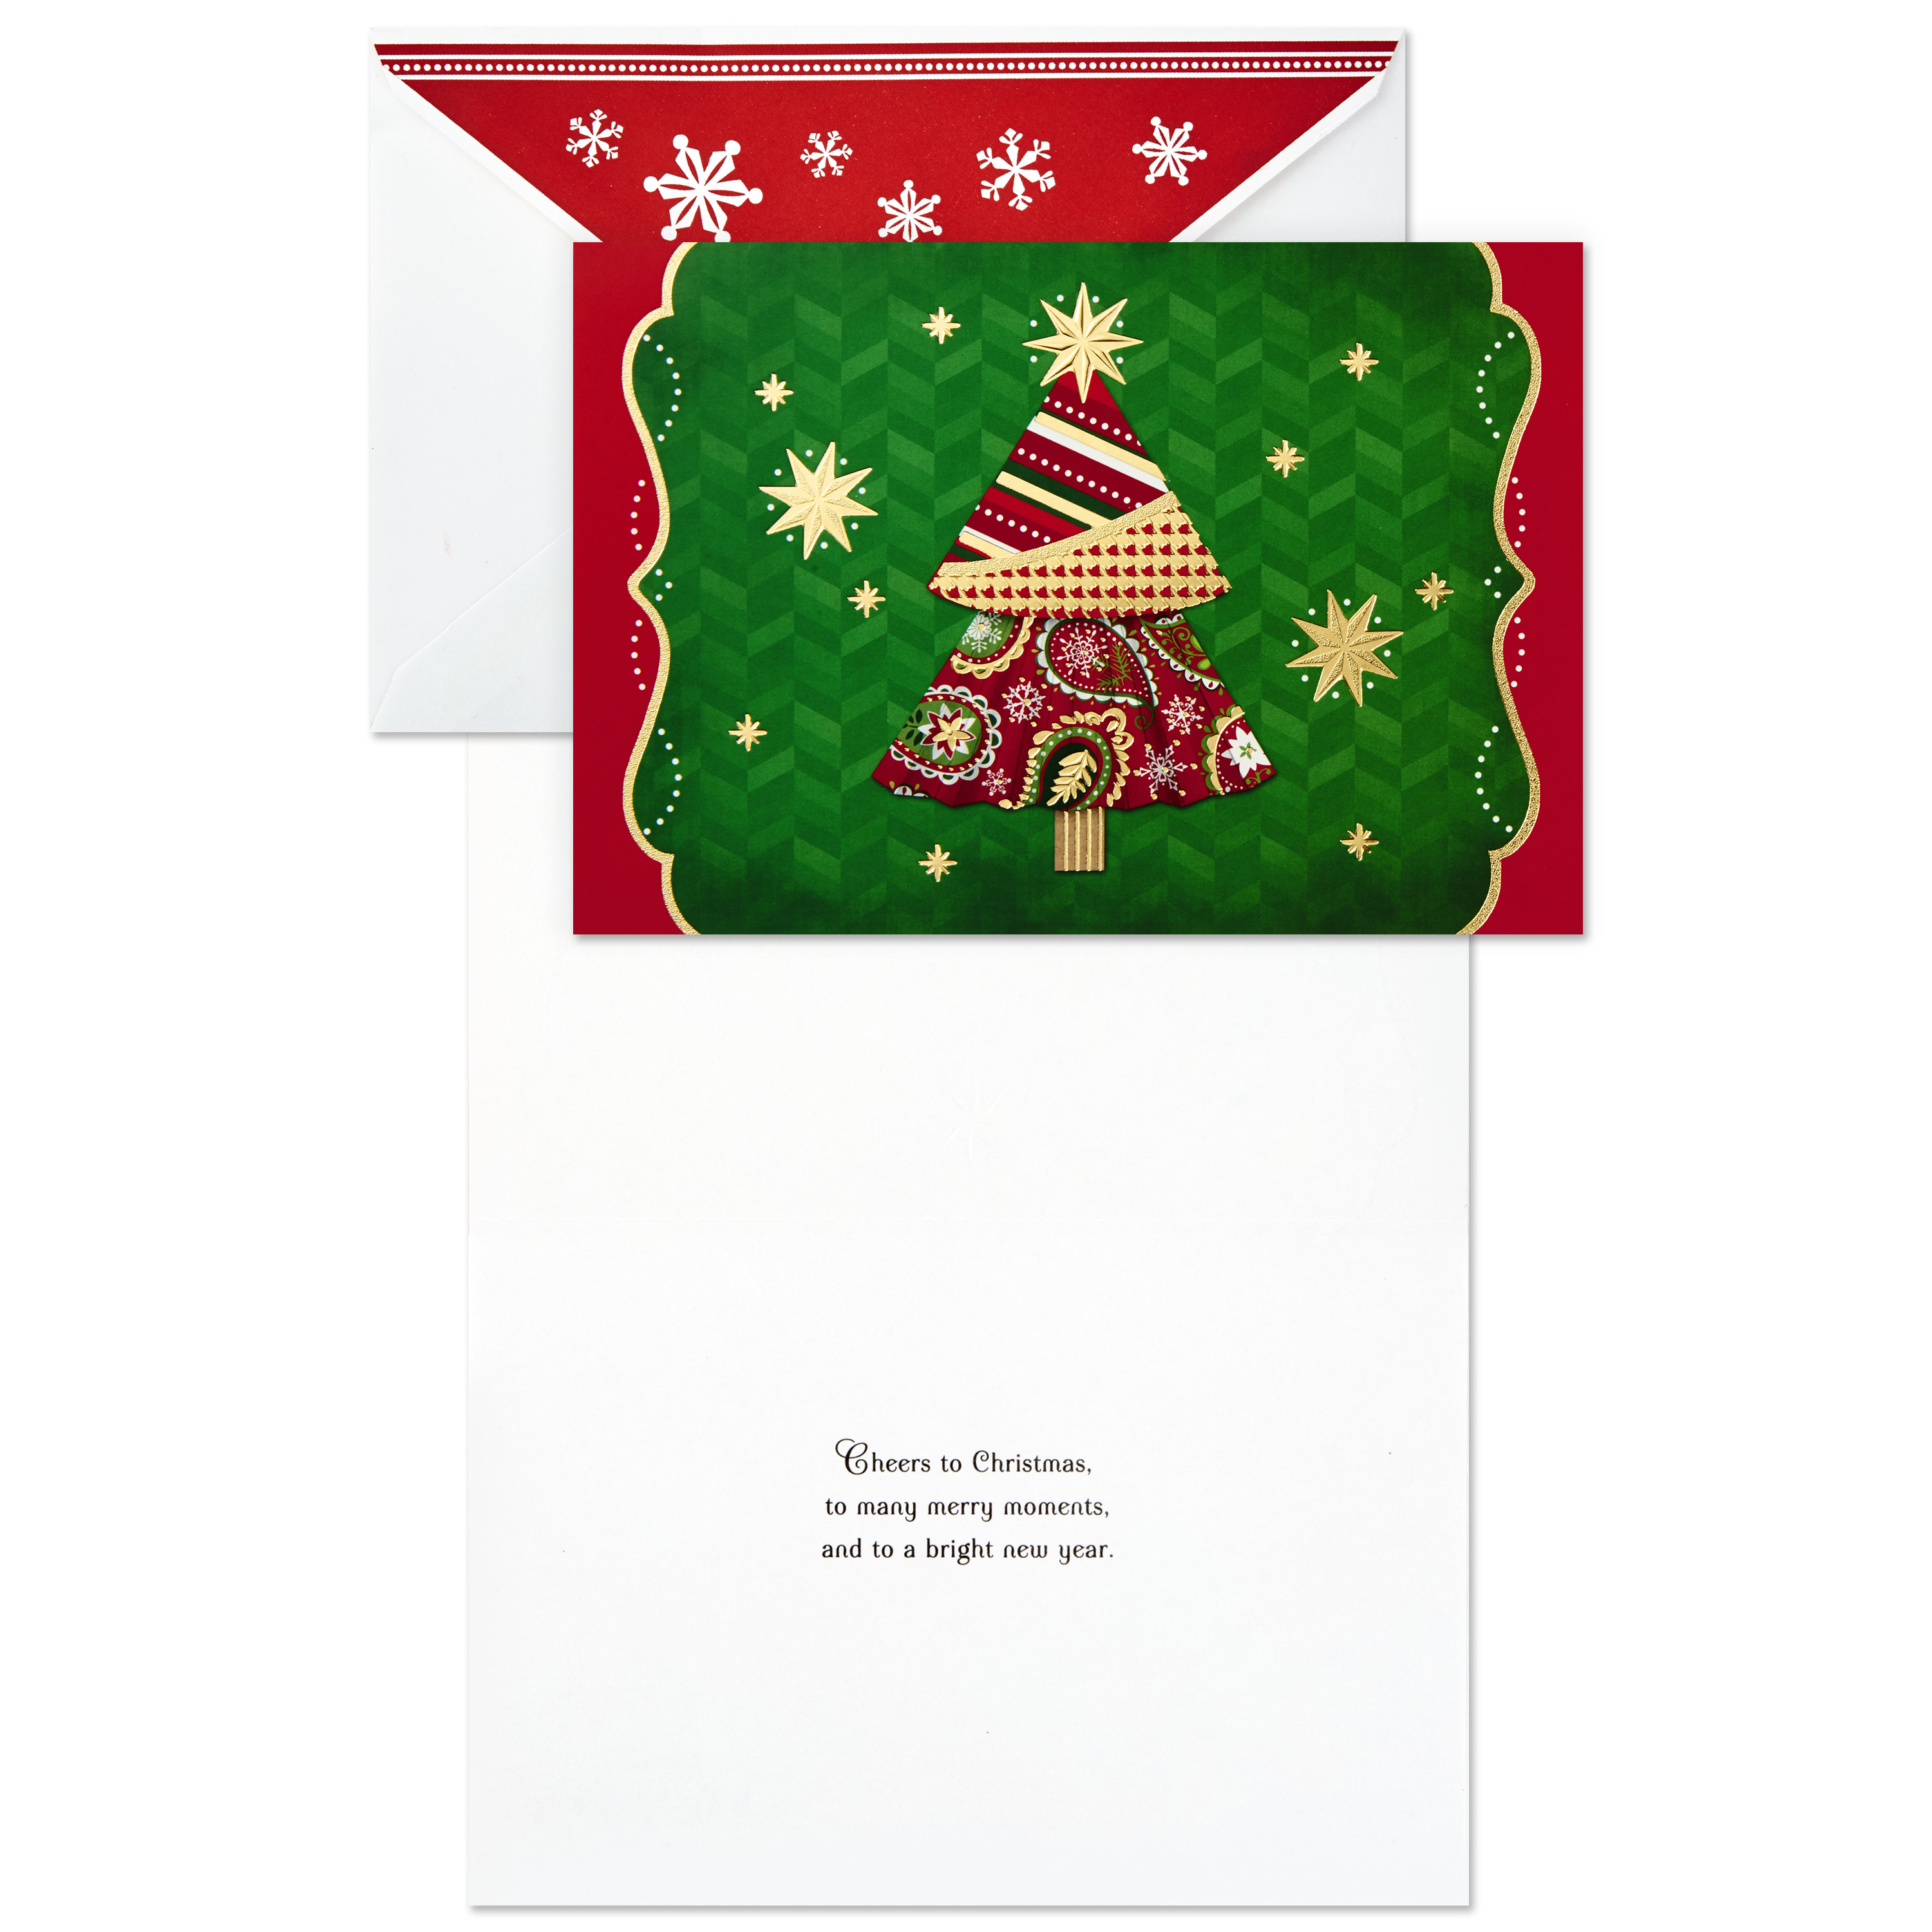 Hallmark Christmas Boxed Greeting Card Assortment, Snowman and Christmas Tree (40 Cards with Envelopes and Gold Seals) - image 4 of 7